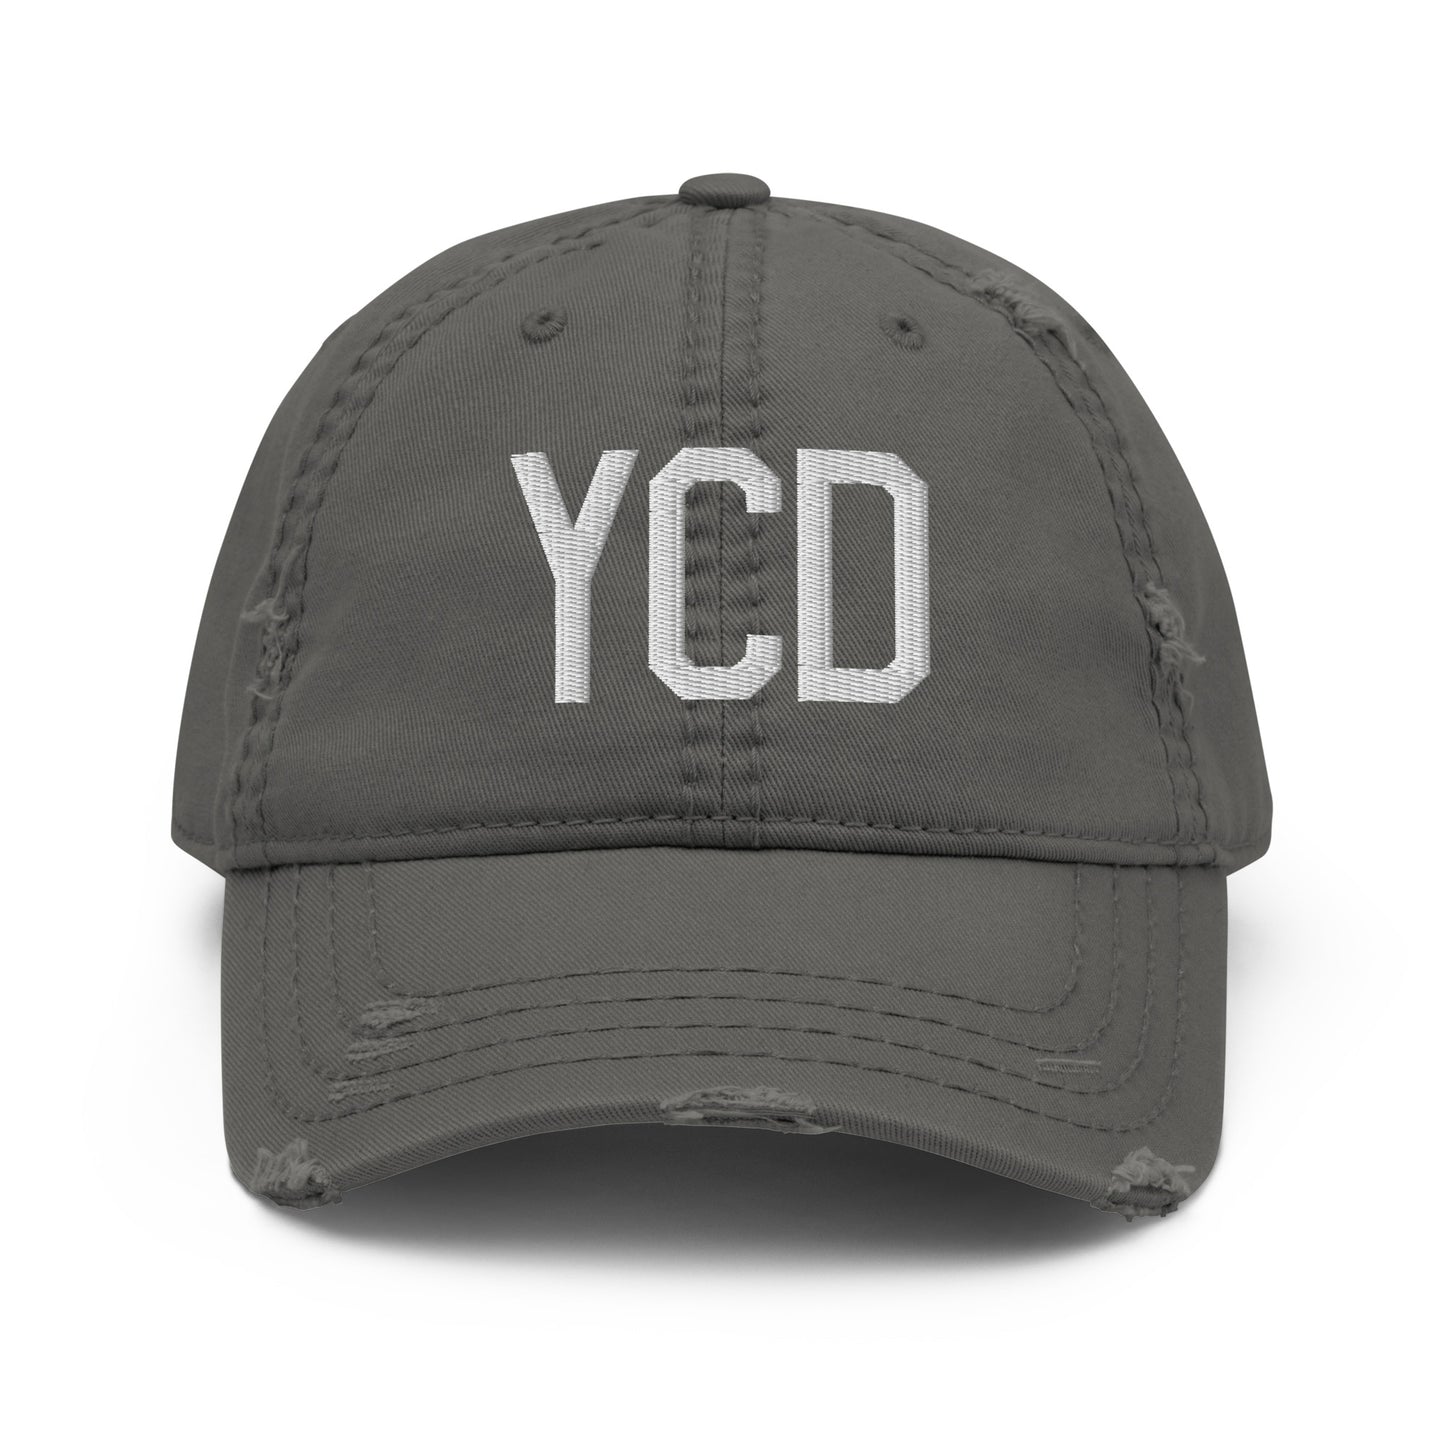 Airport Code Distressed Hat - White • YCD Nanaimo • YHM Designs - Image 15